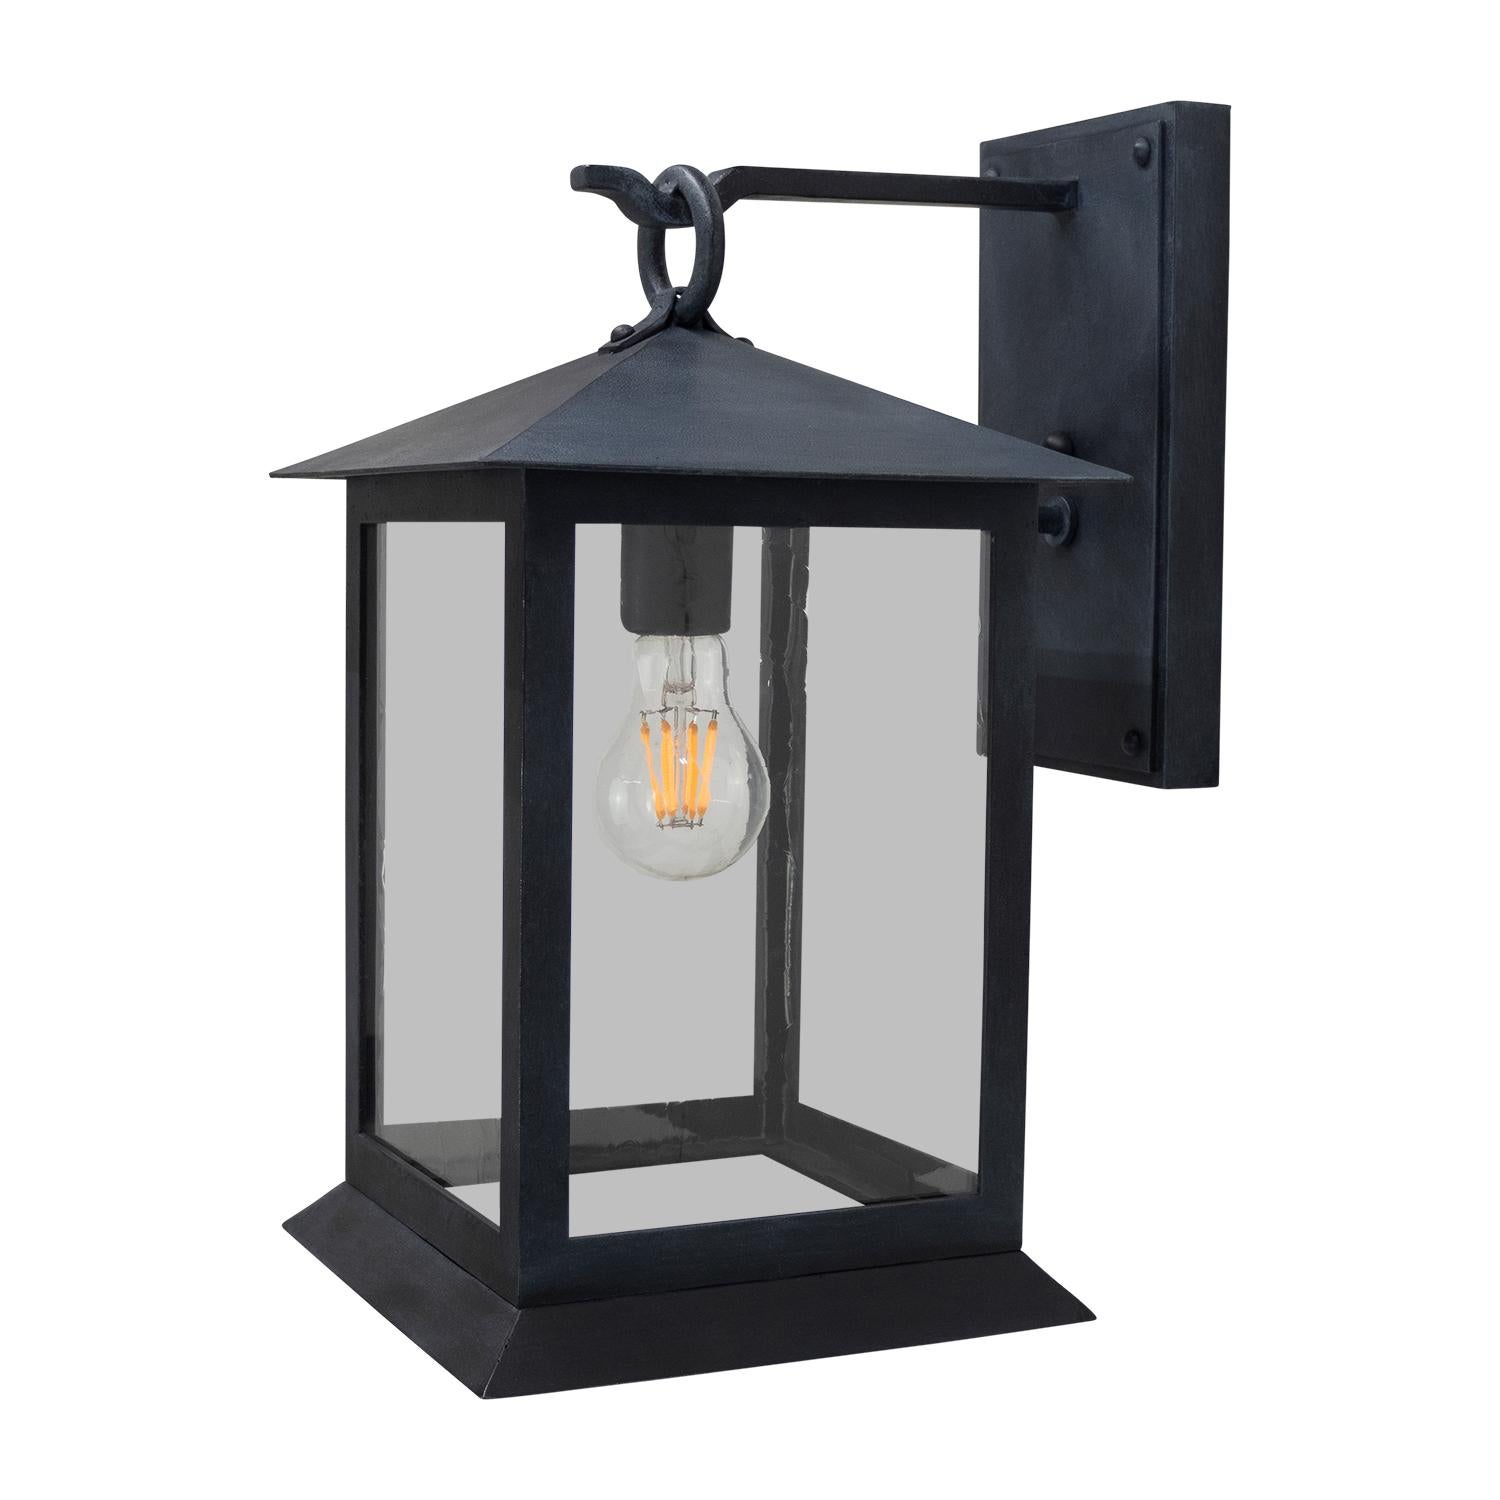 The Meridian Lantern's Design is based on clean lines and simple geometry. The minimalist traditional style is sculptural and contemporary and compliments a range of building styles. 

Lantern shown in SBLC Premium Zinc Finish with SBLC Premium